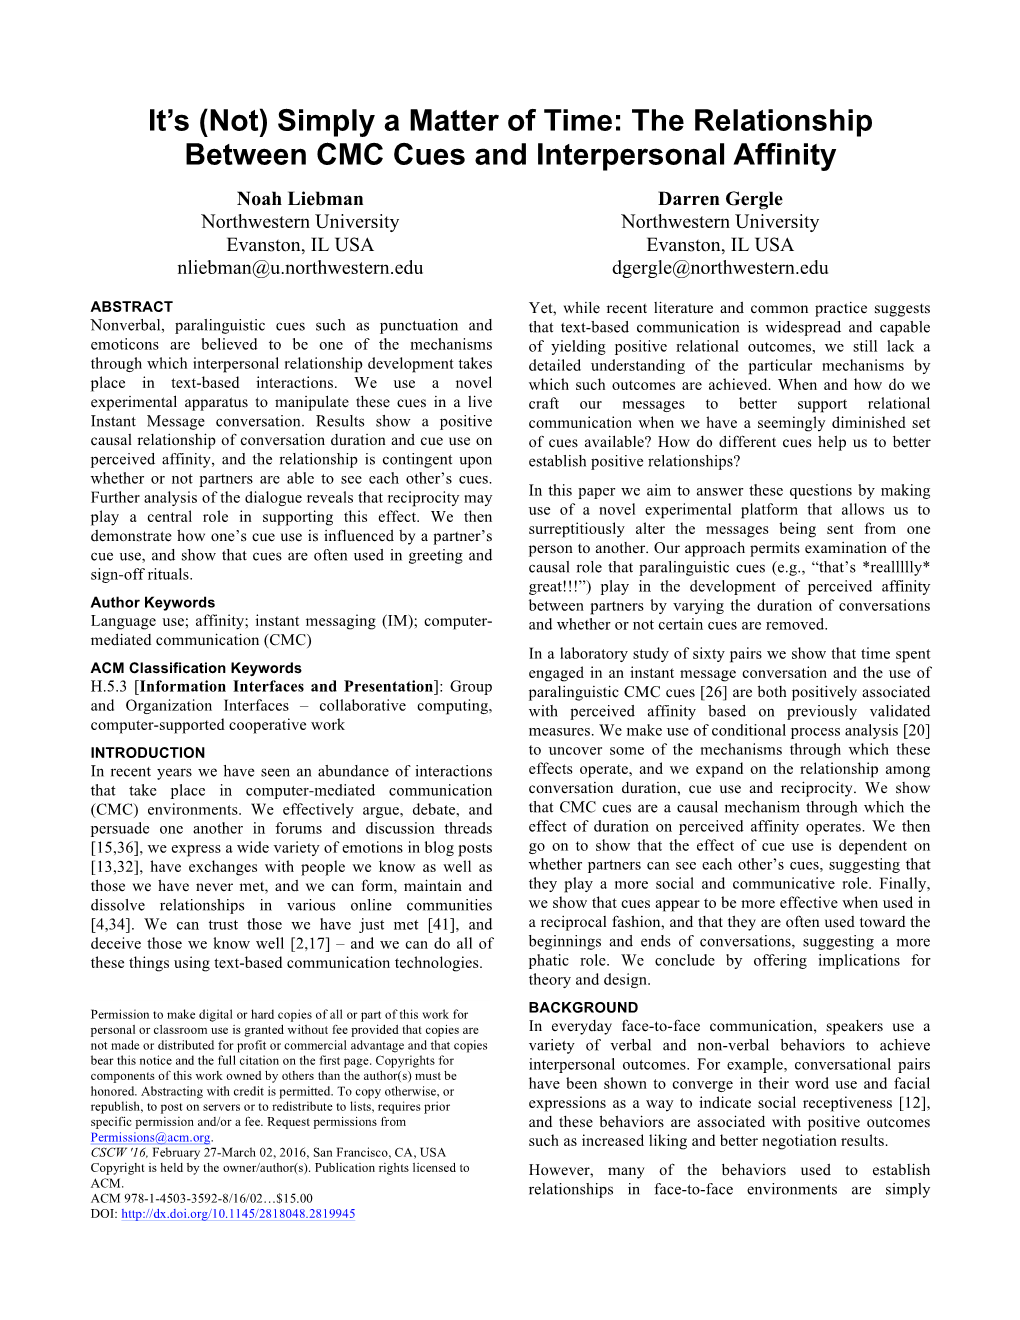 The Relationship Between CMC Cues and Interpersonal Affinity